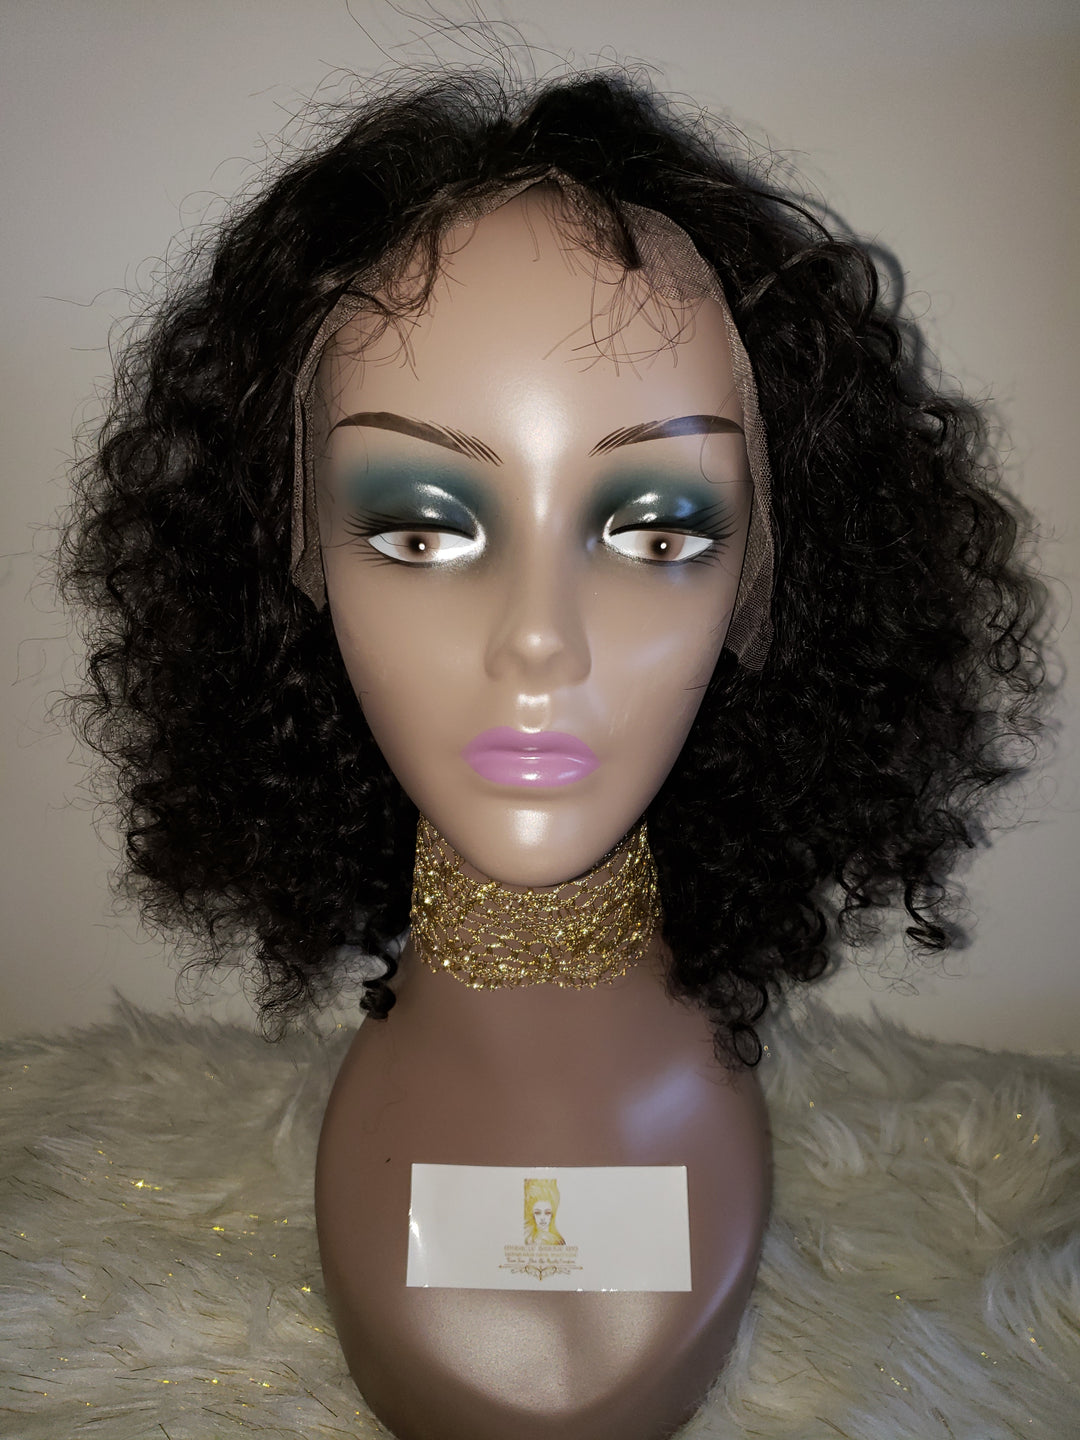 360 Lace Wig (Deep Curly)